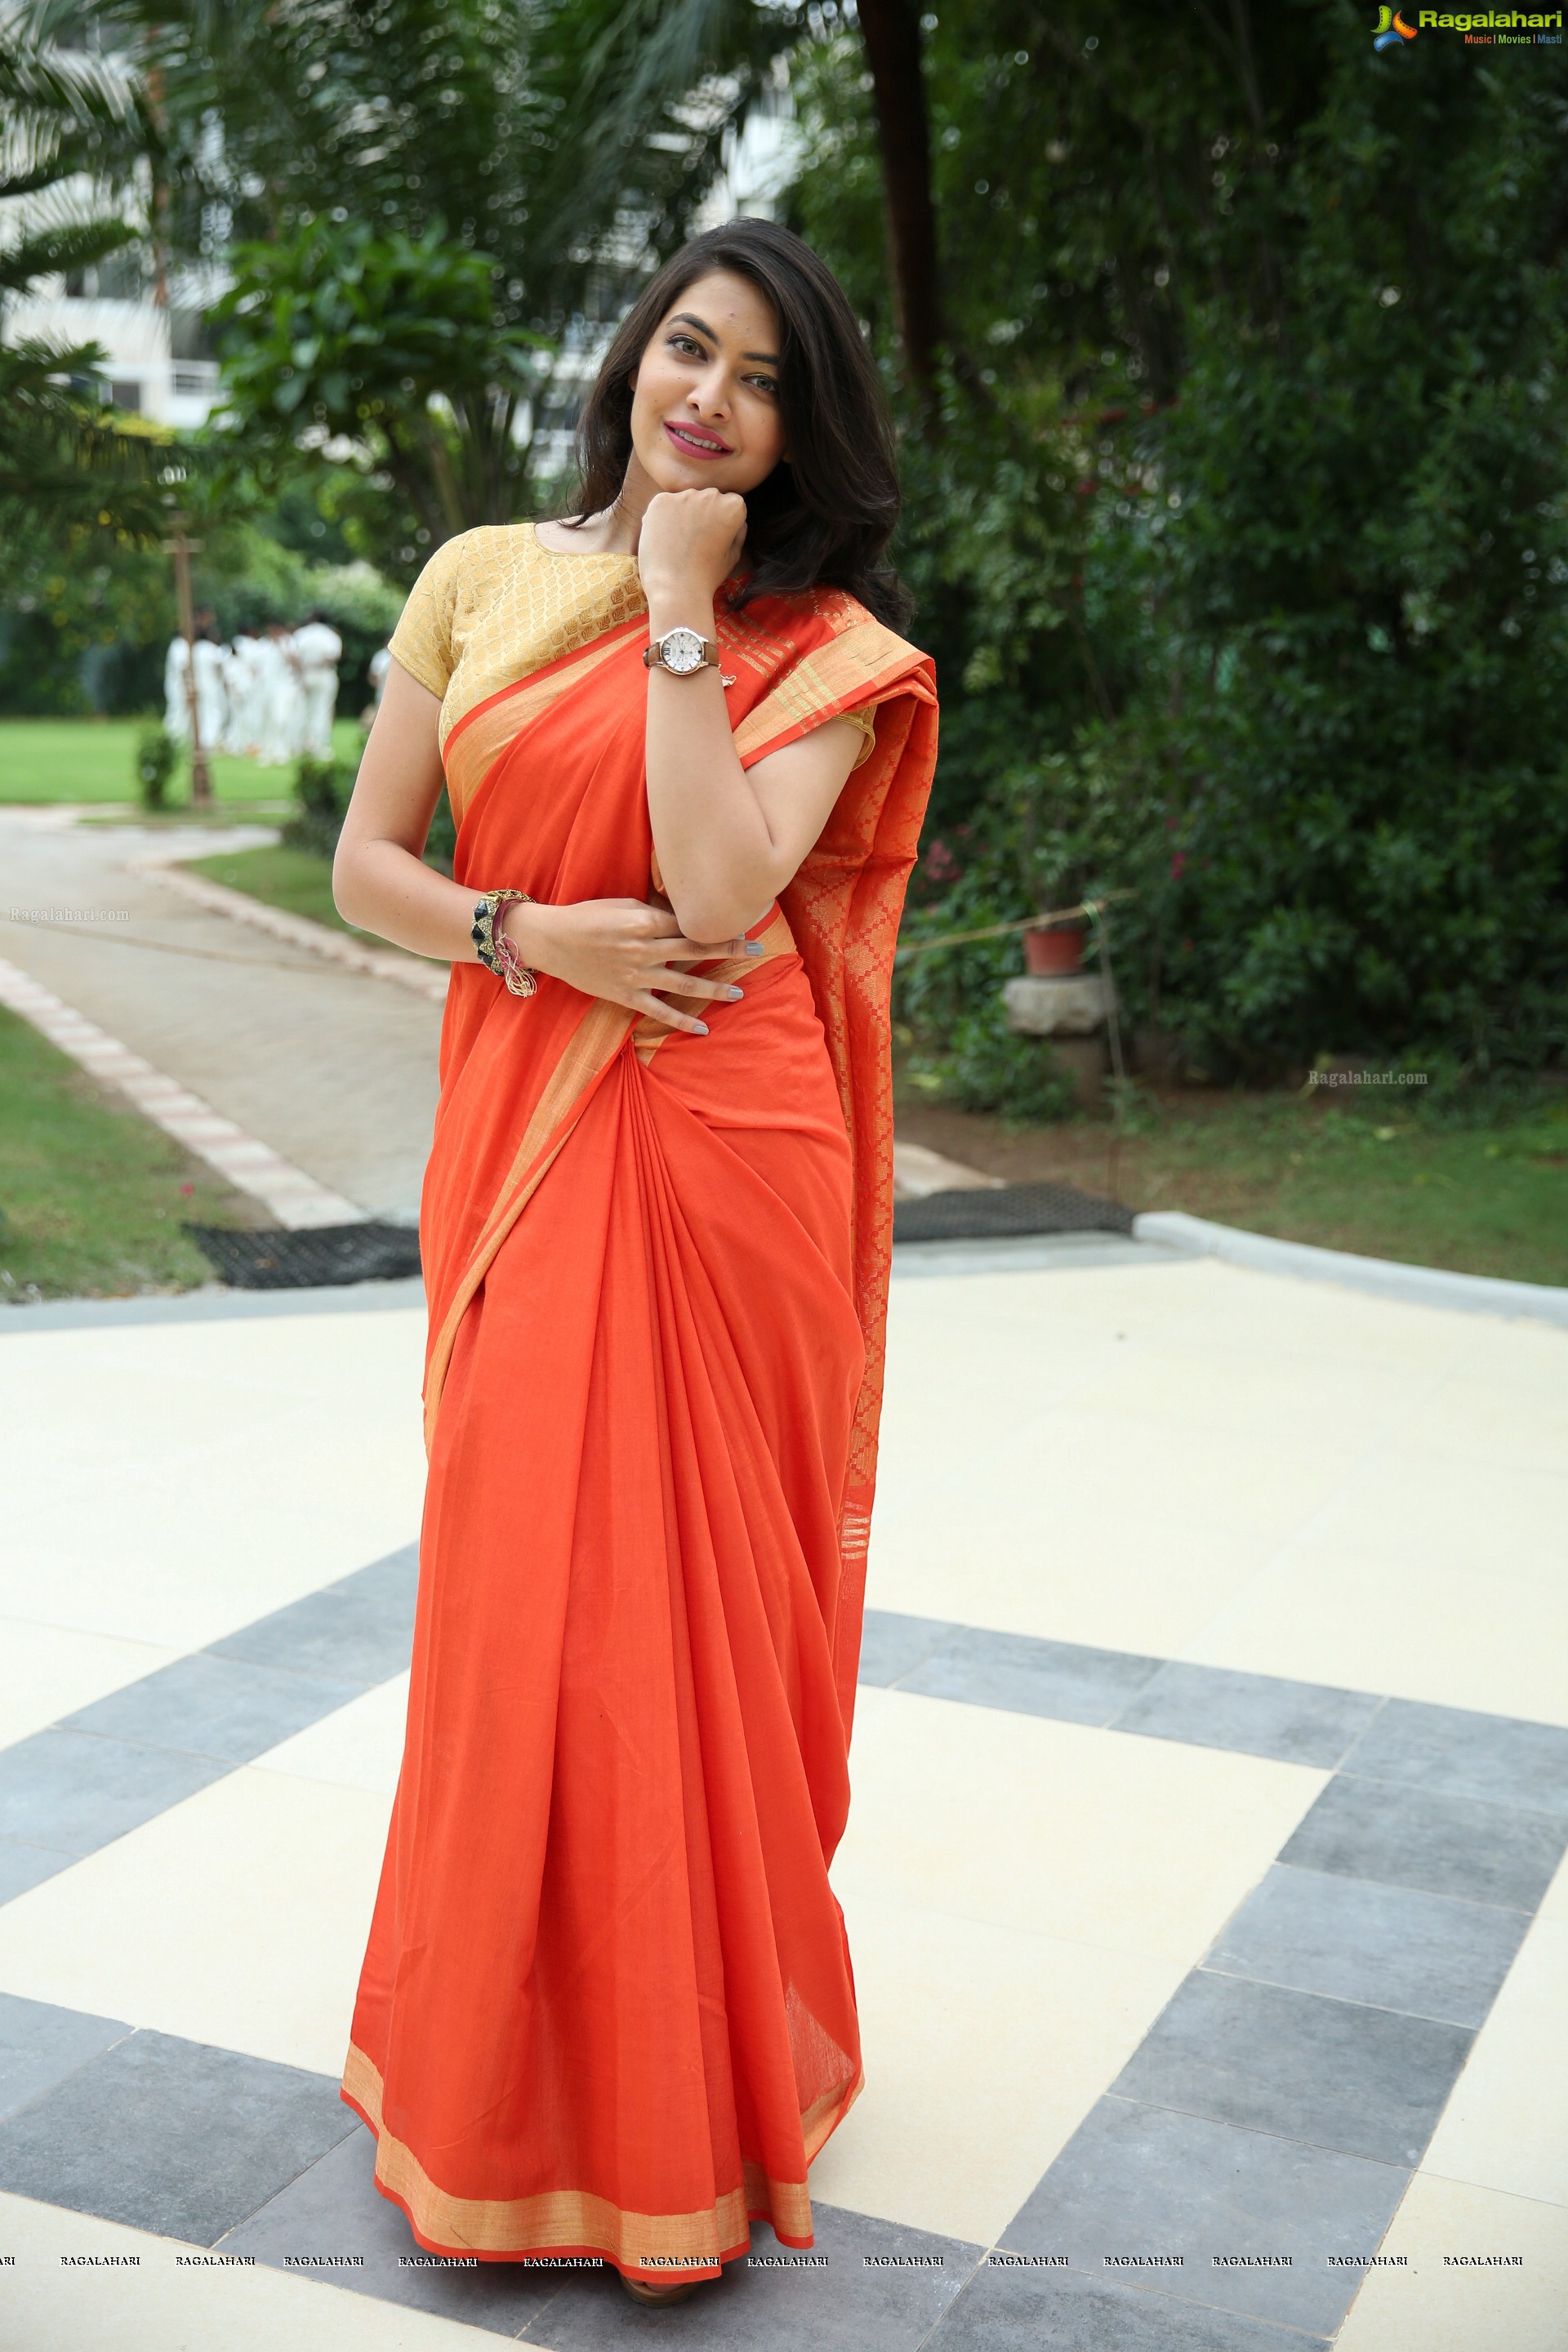 Supraja Reddy at Country Club Pre-Independence Day Celebrations (High Definition Photos)